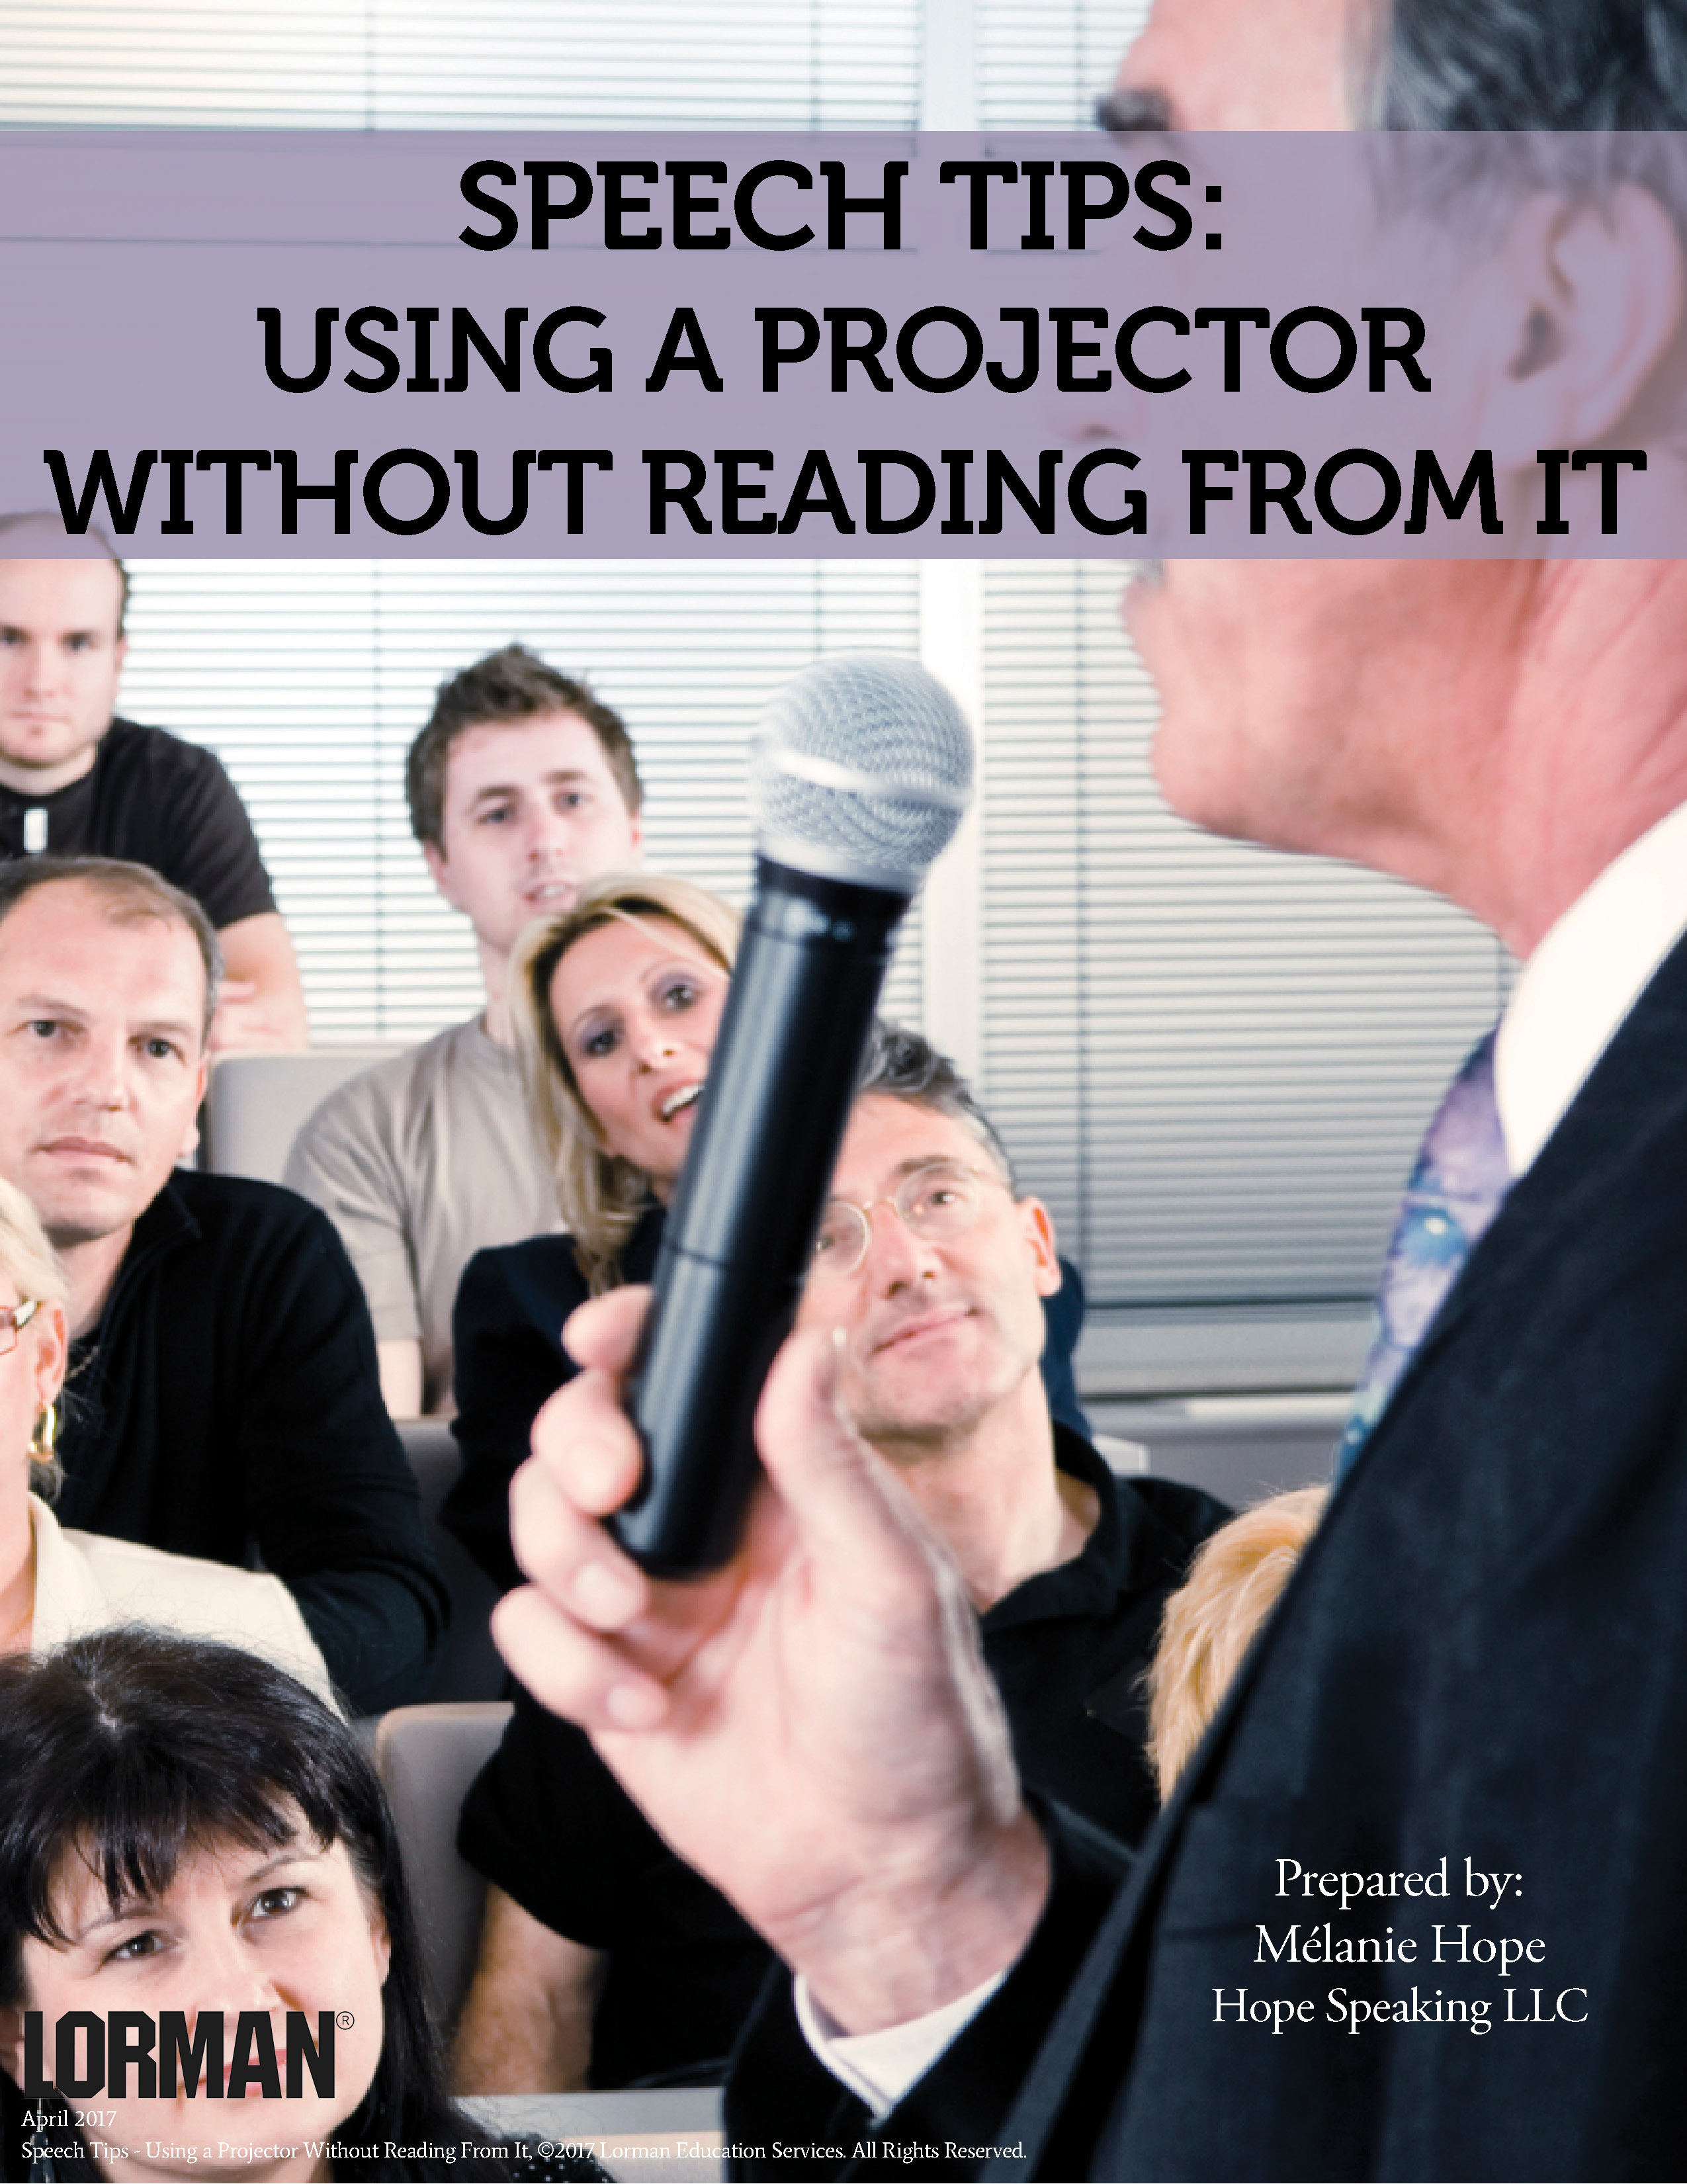 Speech Tips - Using a Projector Without Reading From It